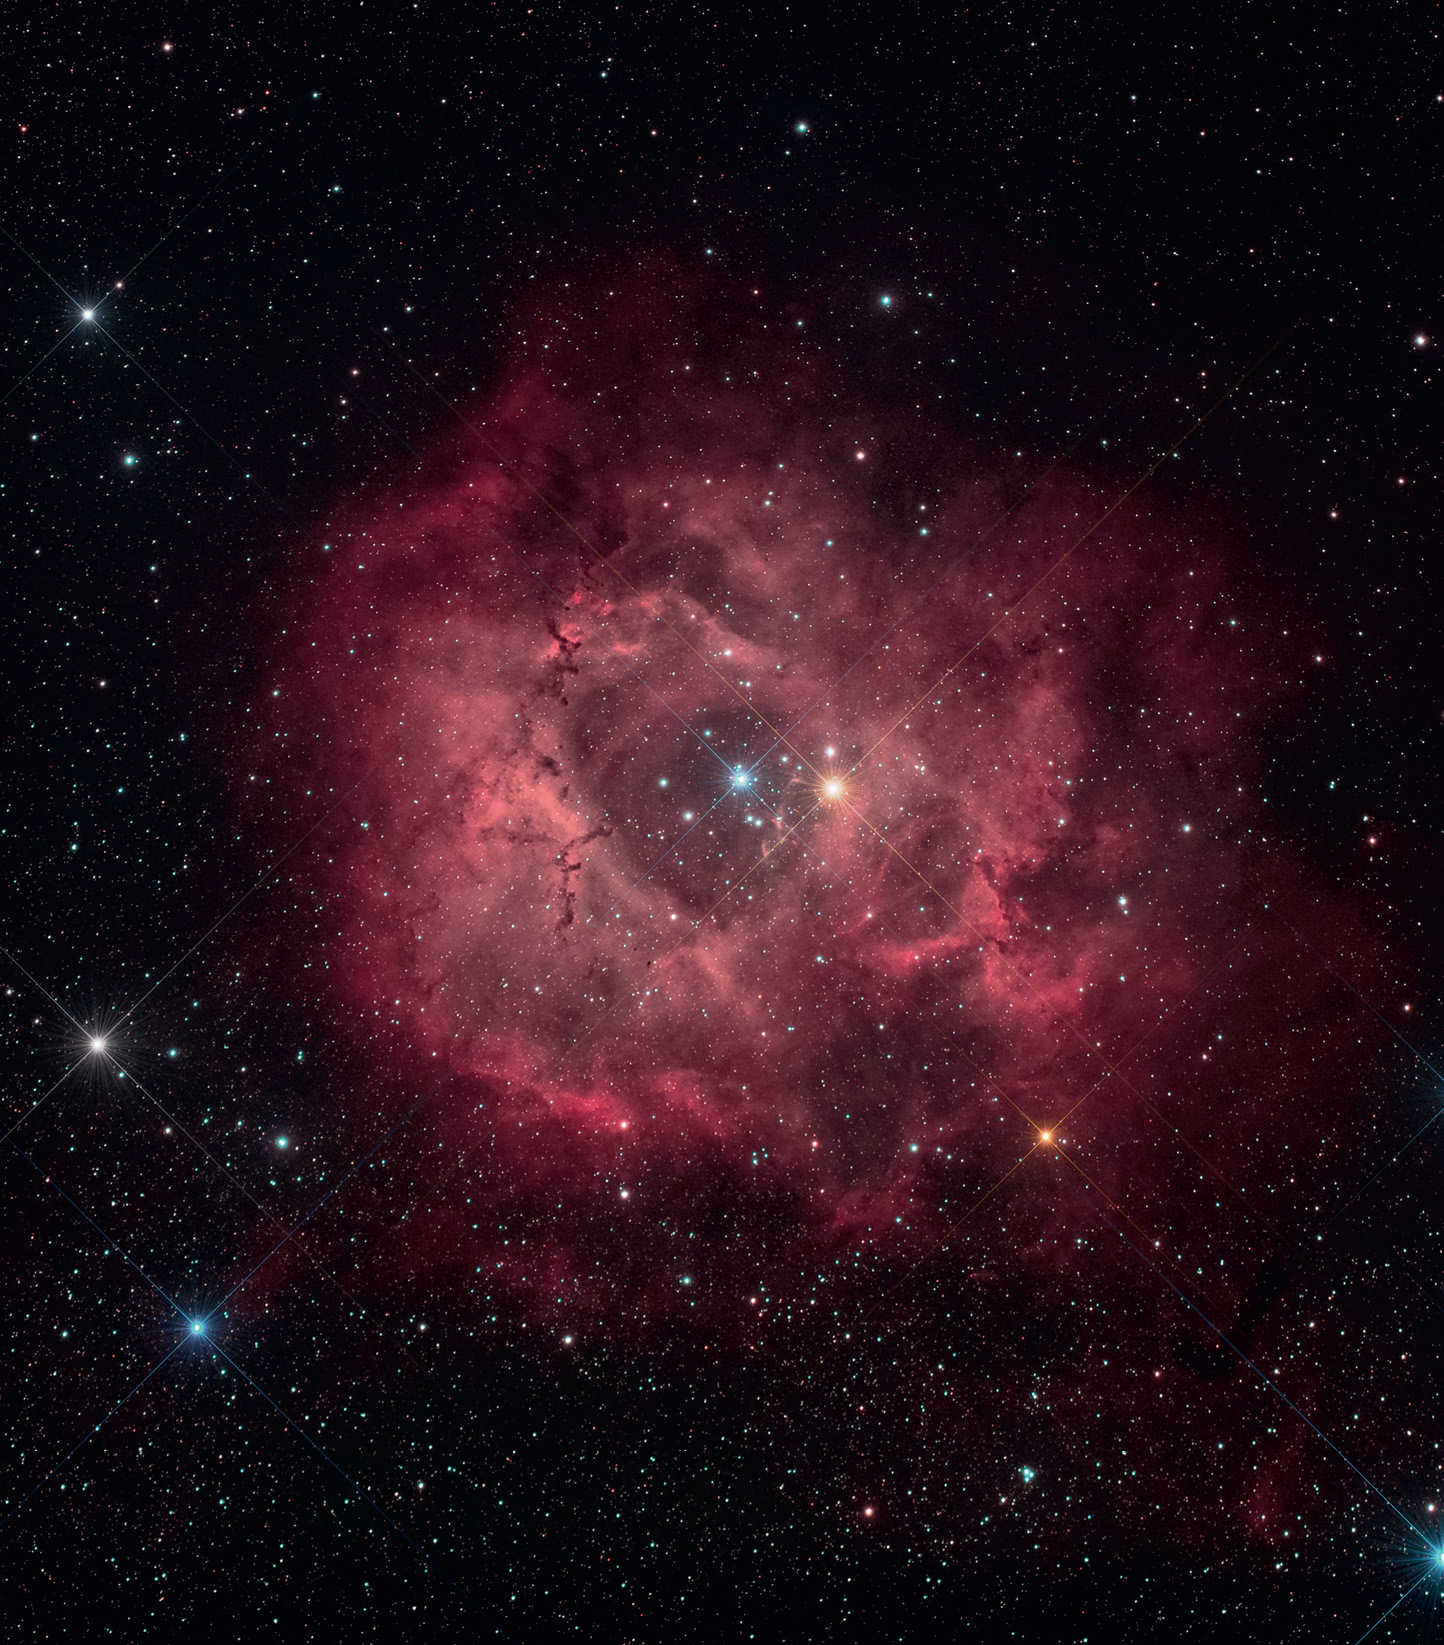 Image of the Rosette Nebula (NGC 2244). Composite image consisting of 14 exposures, each with an exposure time of 300 seconds (ISO 1600, total exposure time: 70 minutes). Further data as shown in the first picture above. U. Dittler